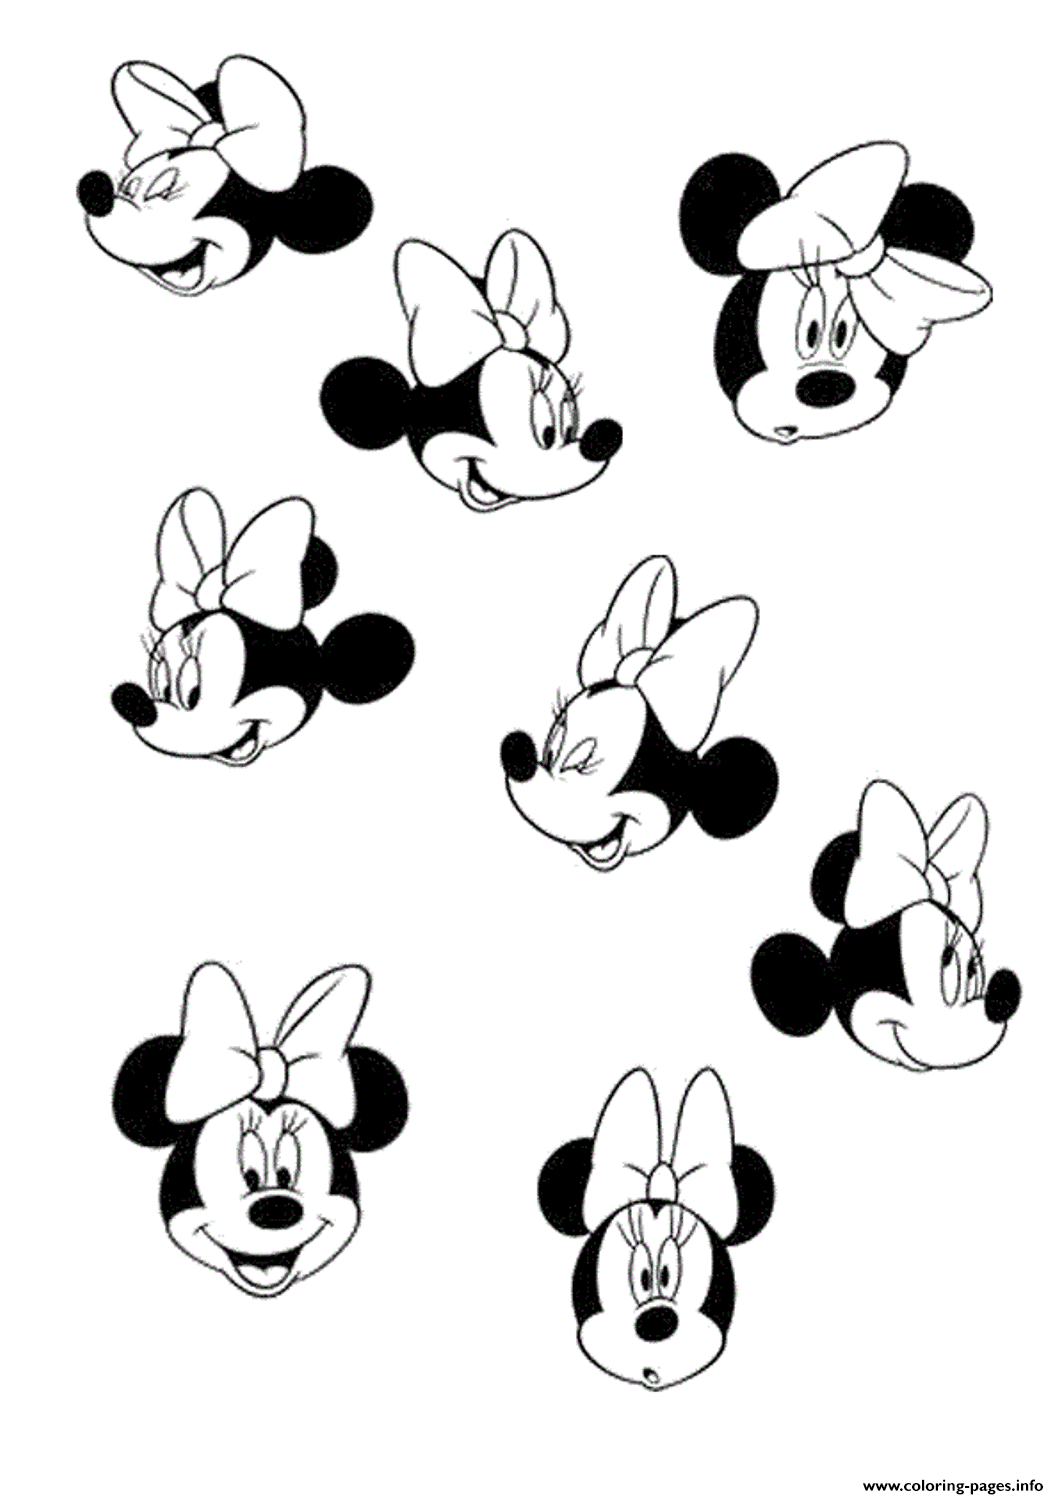 Faces Minnie Mouse Sb1db coloring pages